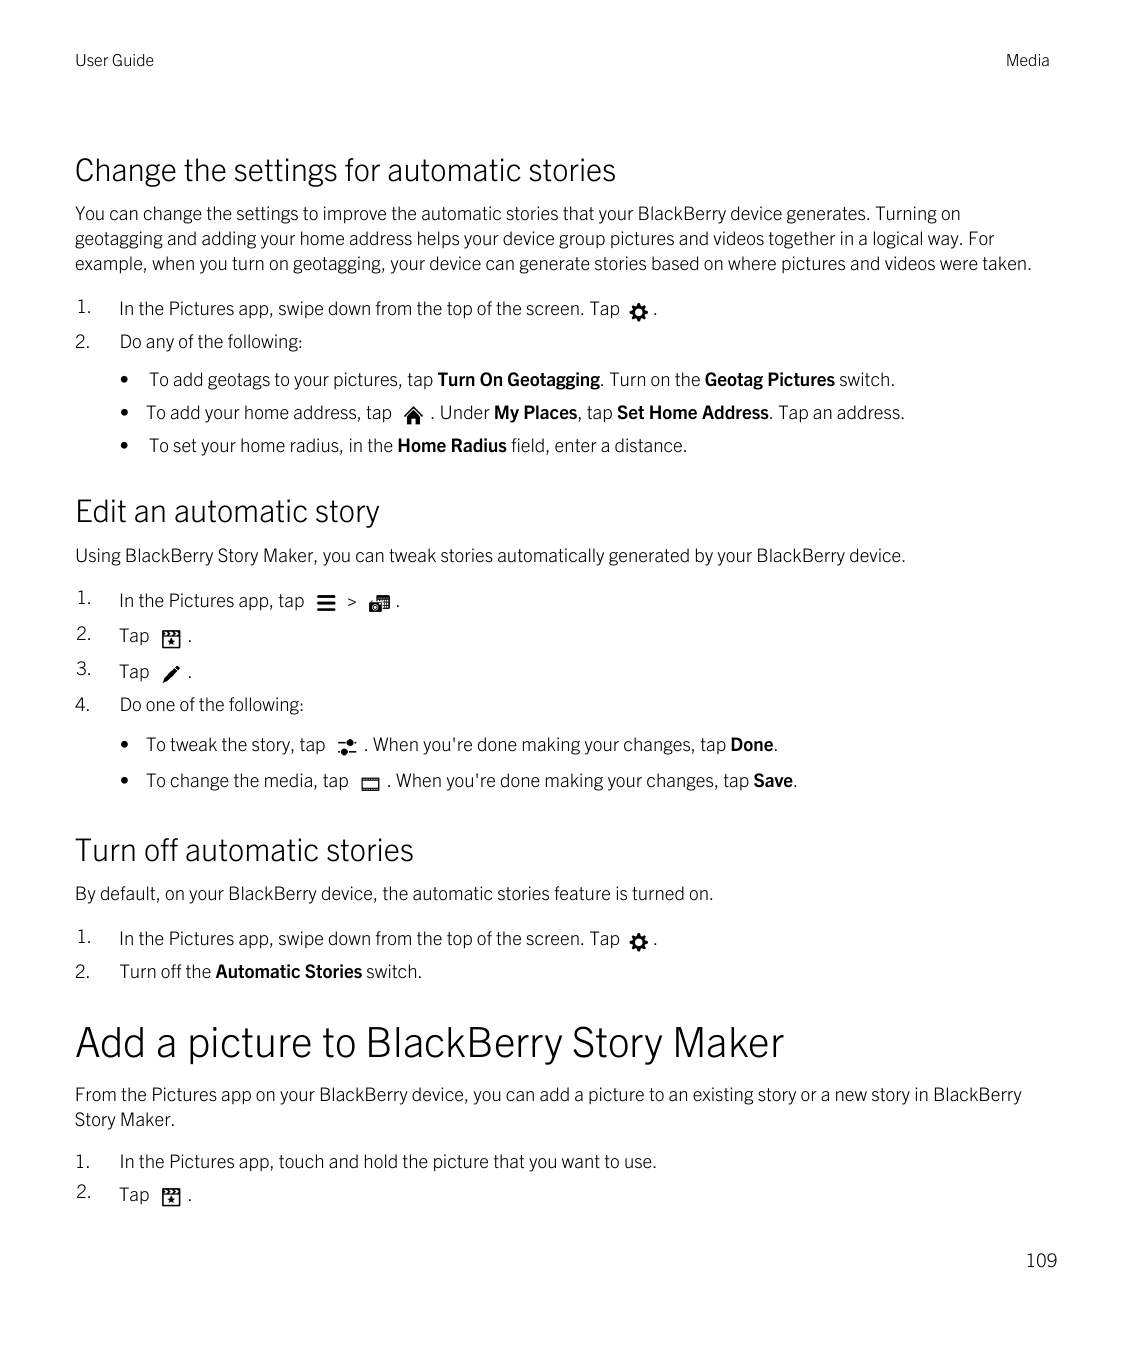 User GuideMediaChange the settings for automatic storiesYou can change the settings to improve the automatic stories that your B